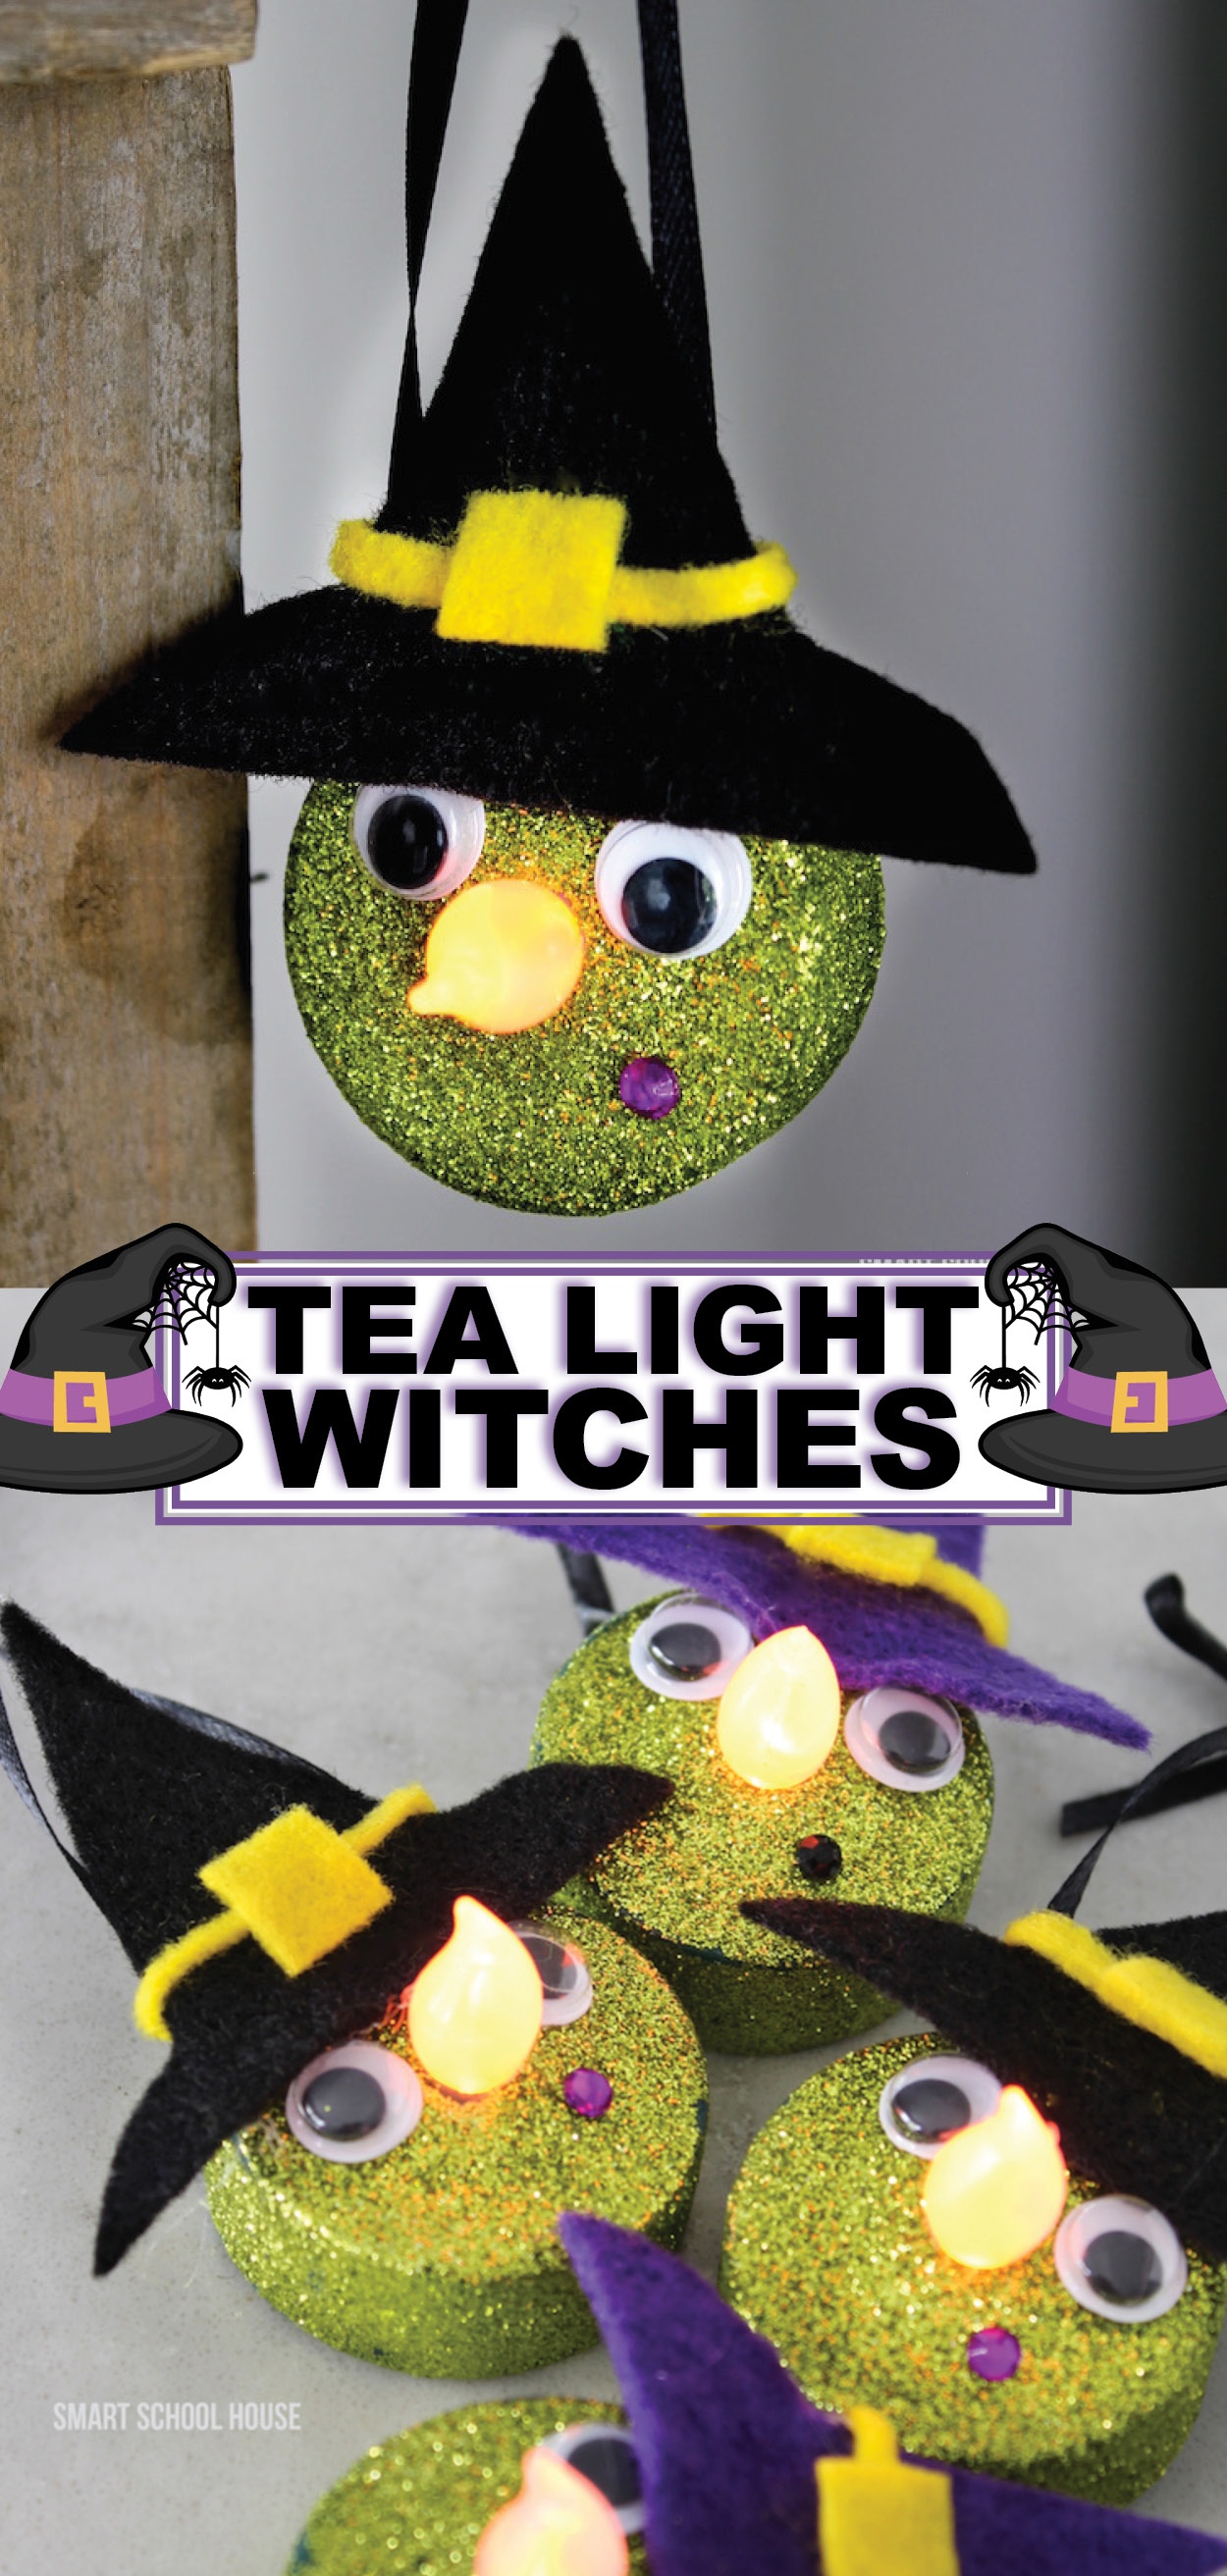 Tea Light Witches Smart School House - roblox witch hat id